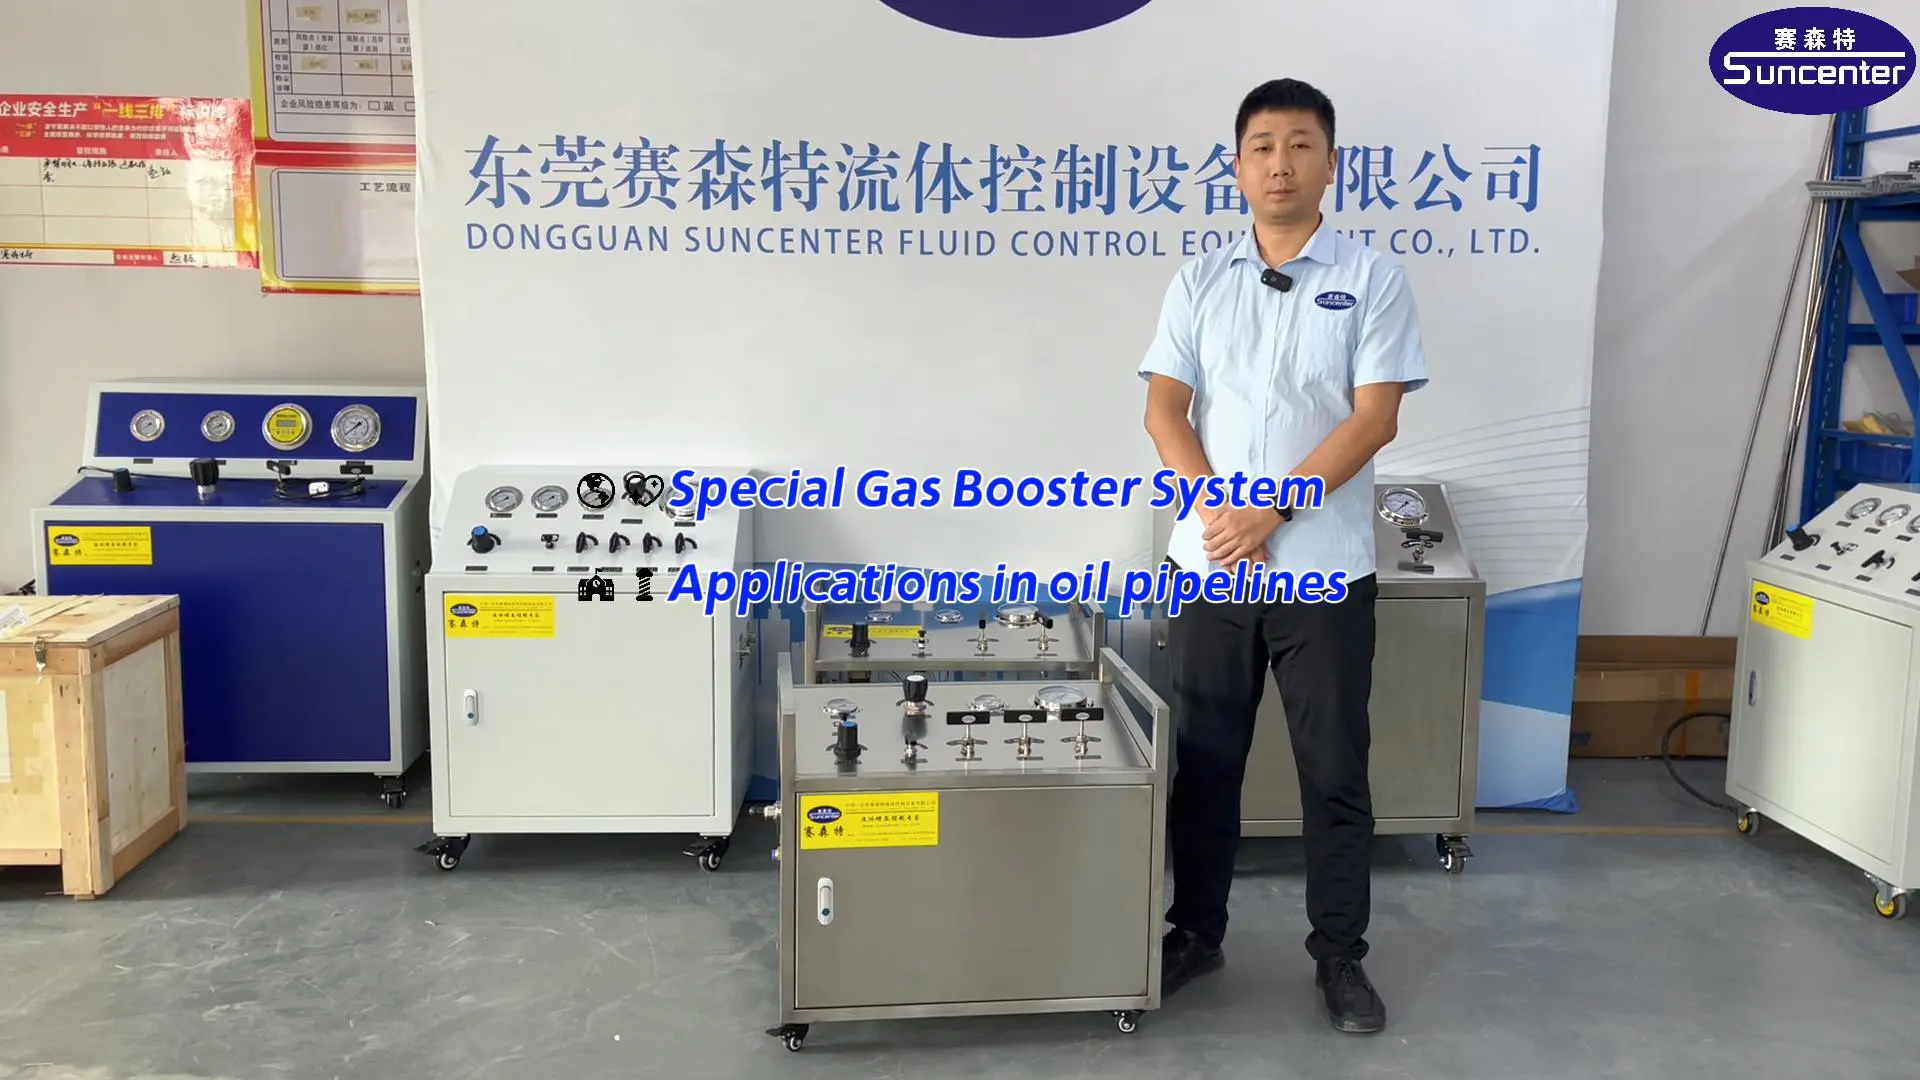 Suncenter Special Gas Booster System for Boosting Oil Pipelines